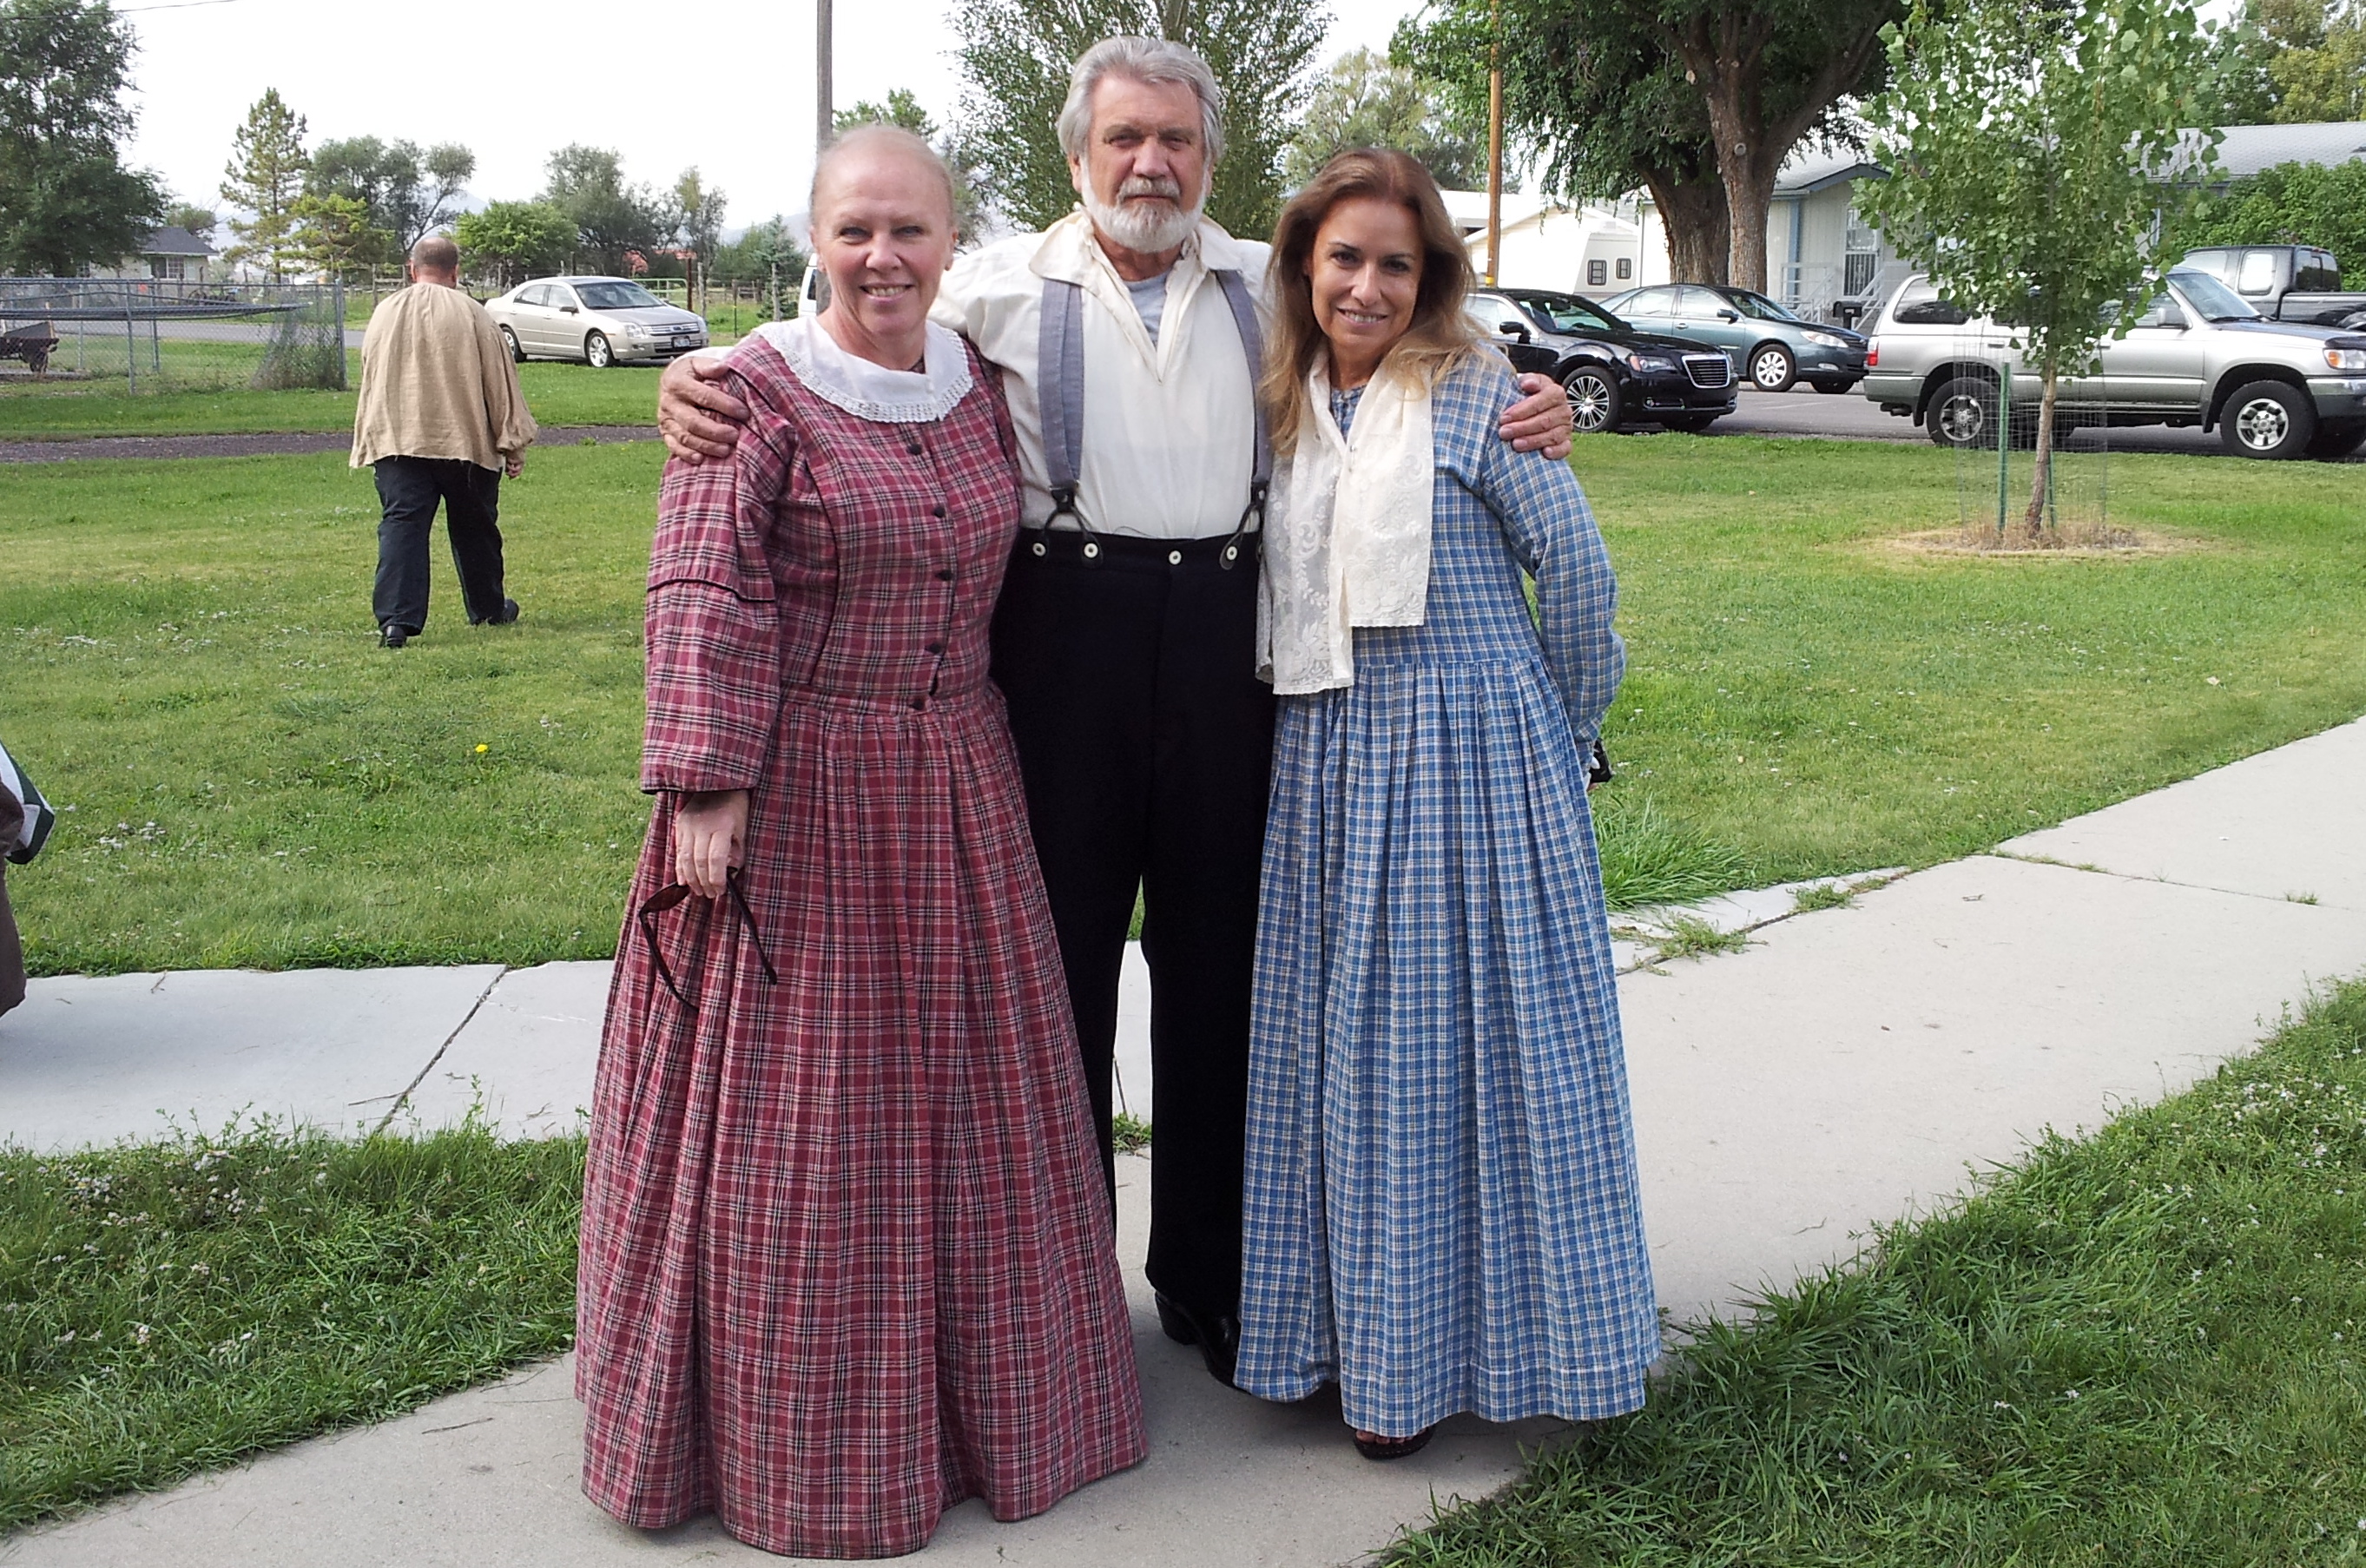 ON SET:'Red Creek' Day 1 of production. Deborah Lee Douglas, Keith Hottinger, April Girard. Camp Floyd / Stagecoach Inn State Park and Museum, UT. 9.2013